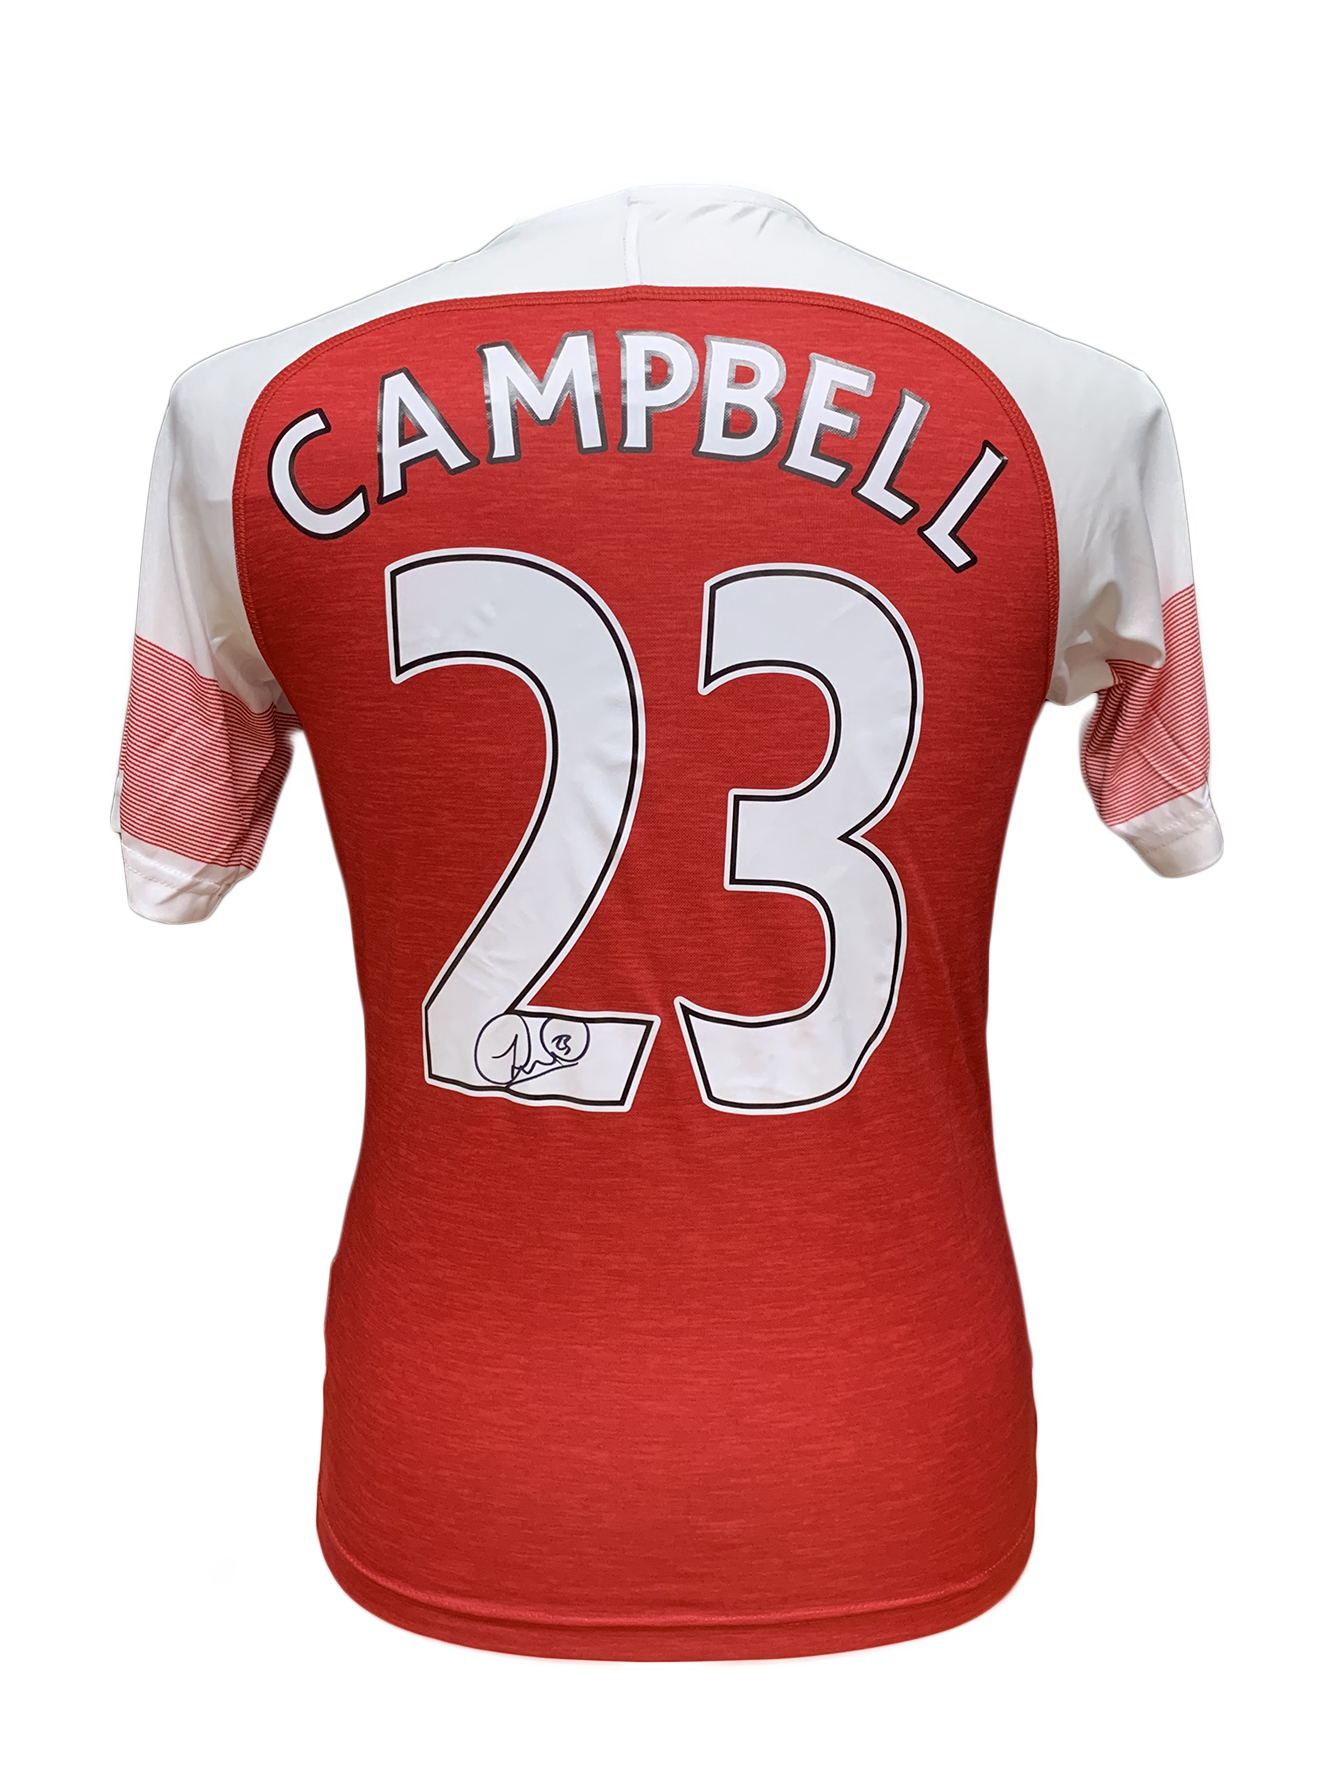 Arsenal FC Sol Campbell #23 Malance Football Soccer Jersey Size Small